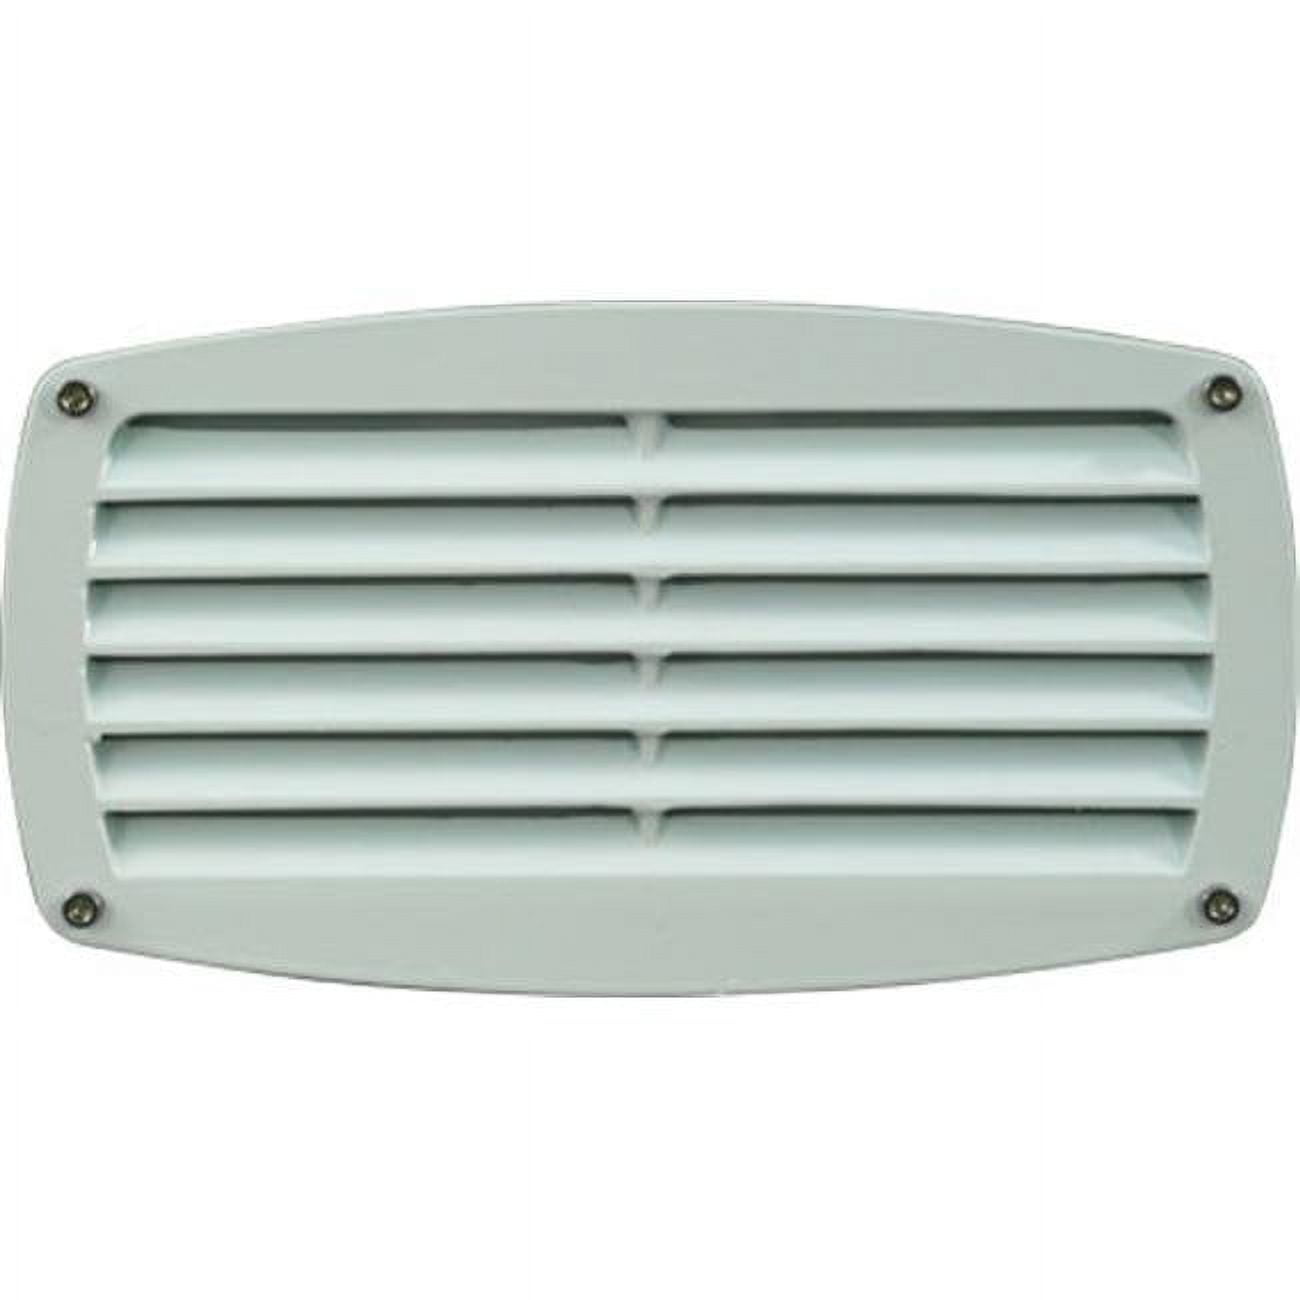 Picture of Dabmar Lighting DSL1017-W Recessed Louvered Brick, Step & Wall Light, White - 4.85 x 8.95 x 3.80 in.